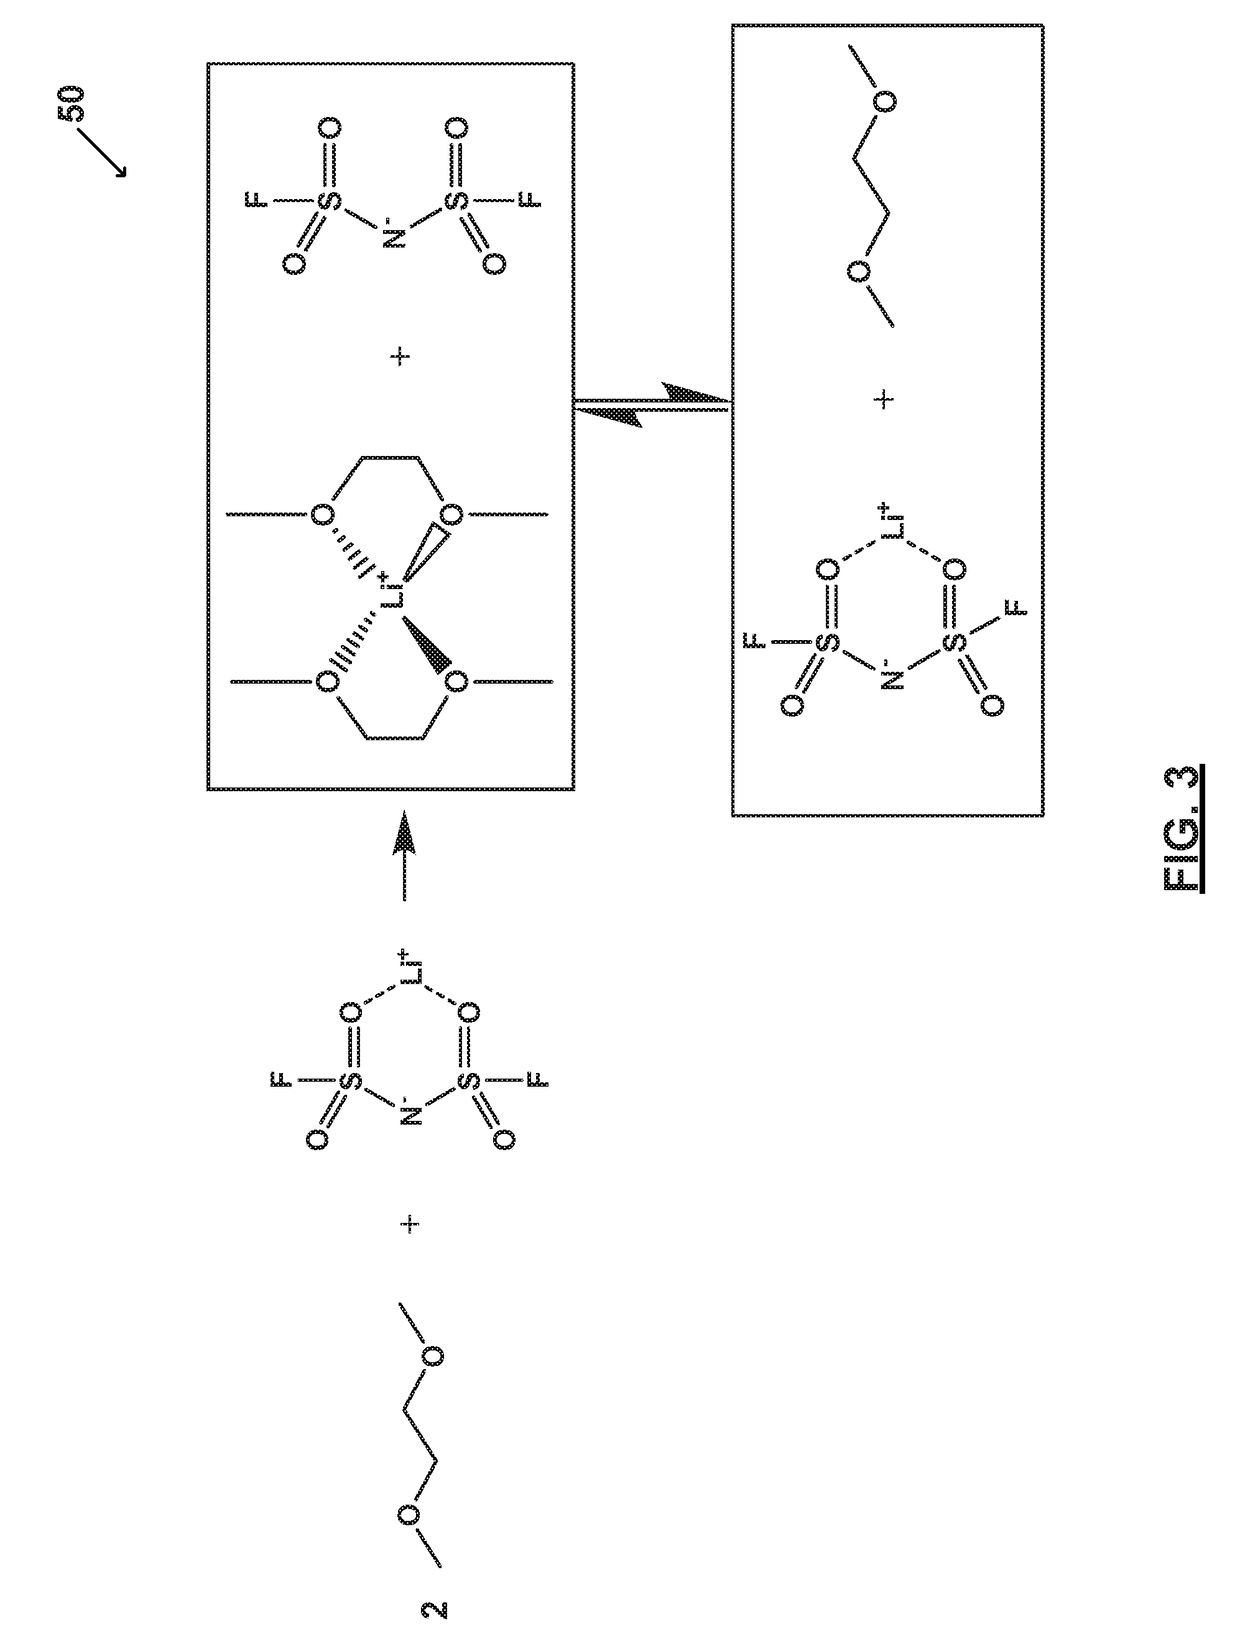 Ether-based electrolyte system improving or supporting anodic stability of electrochemical cells having lithium-containing anodes